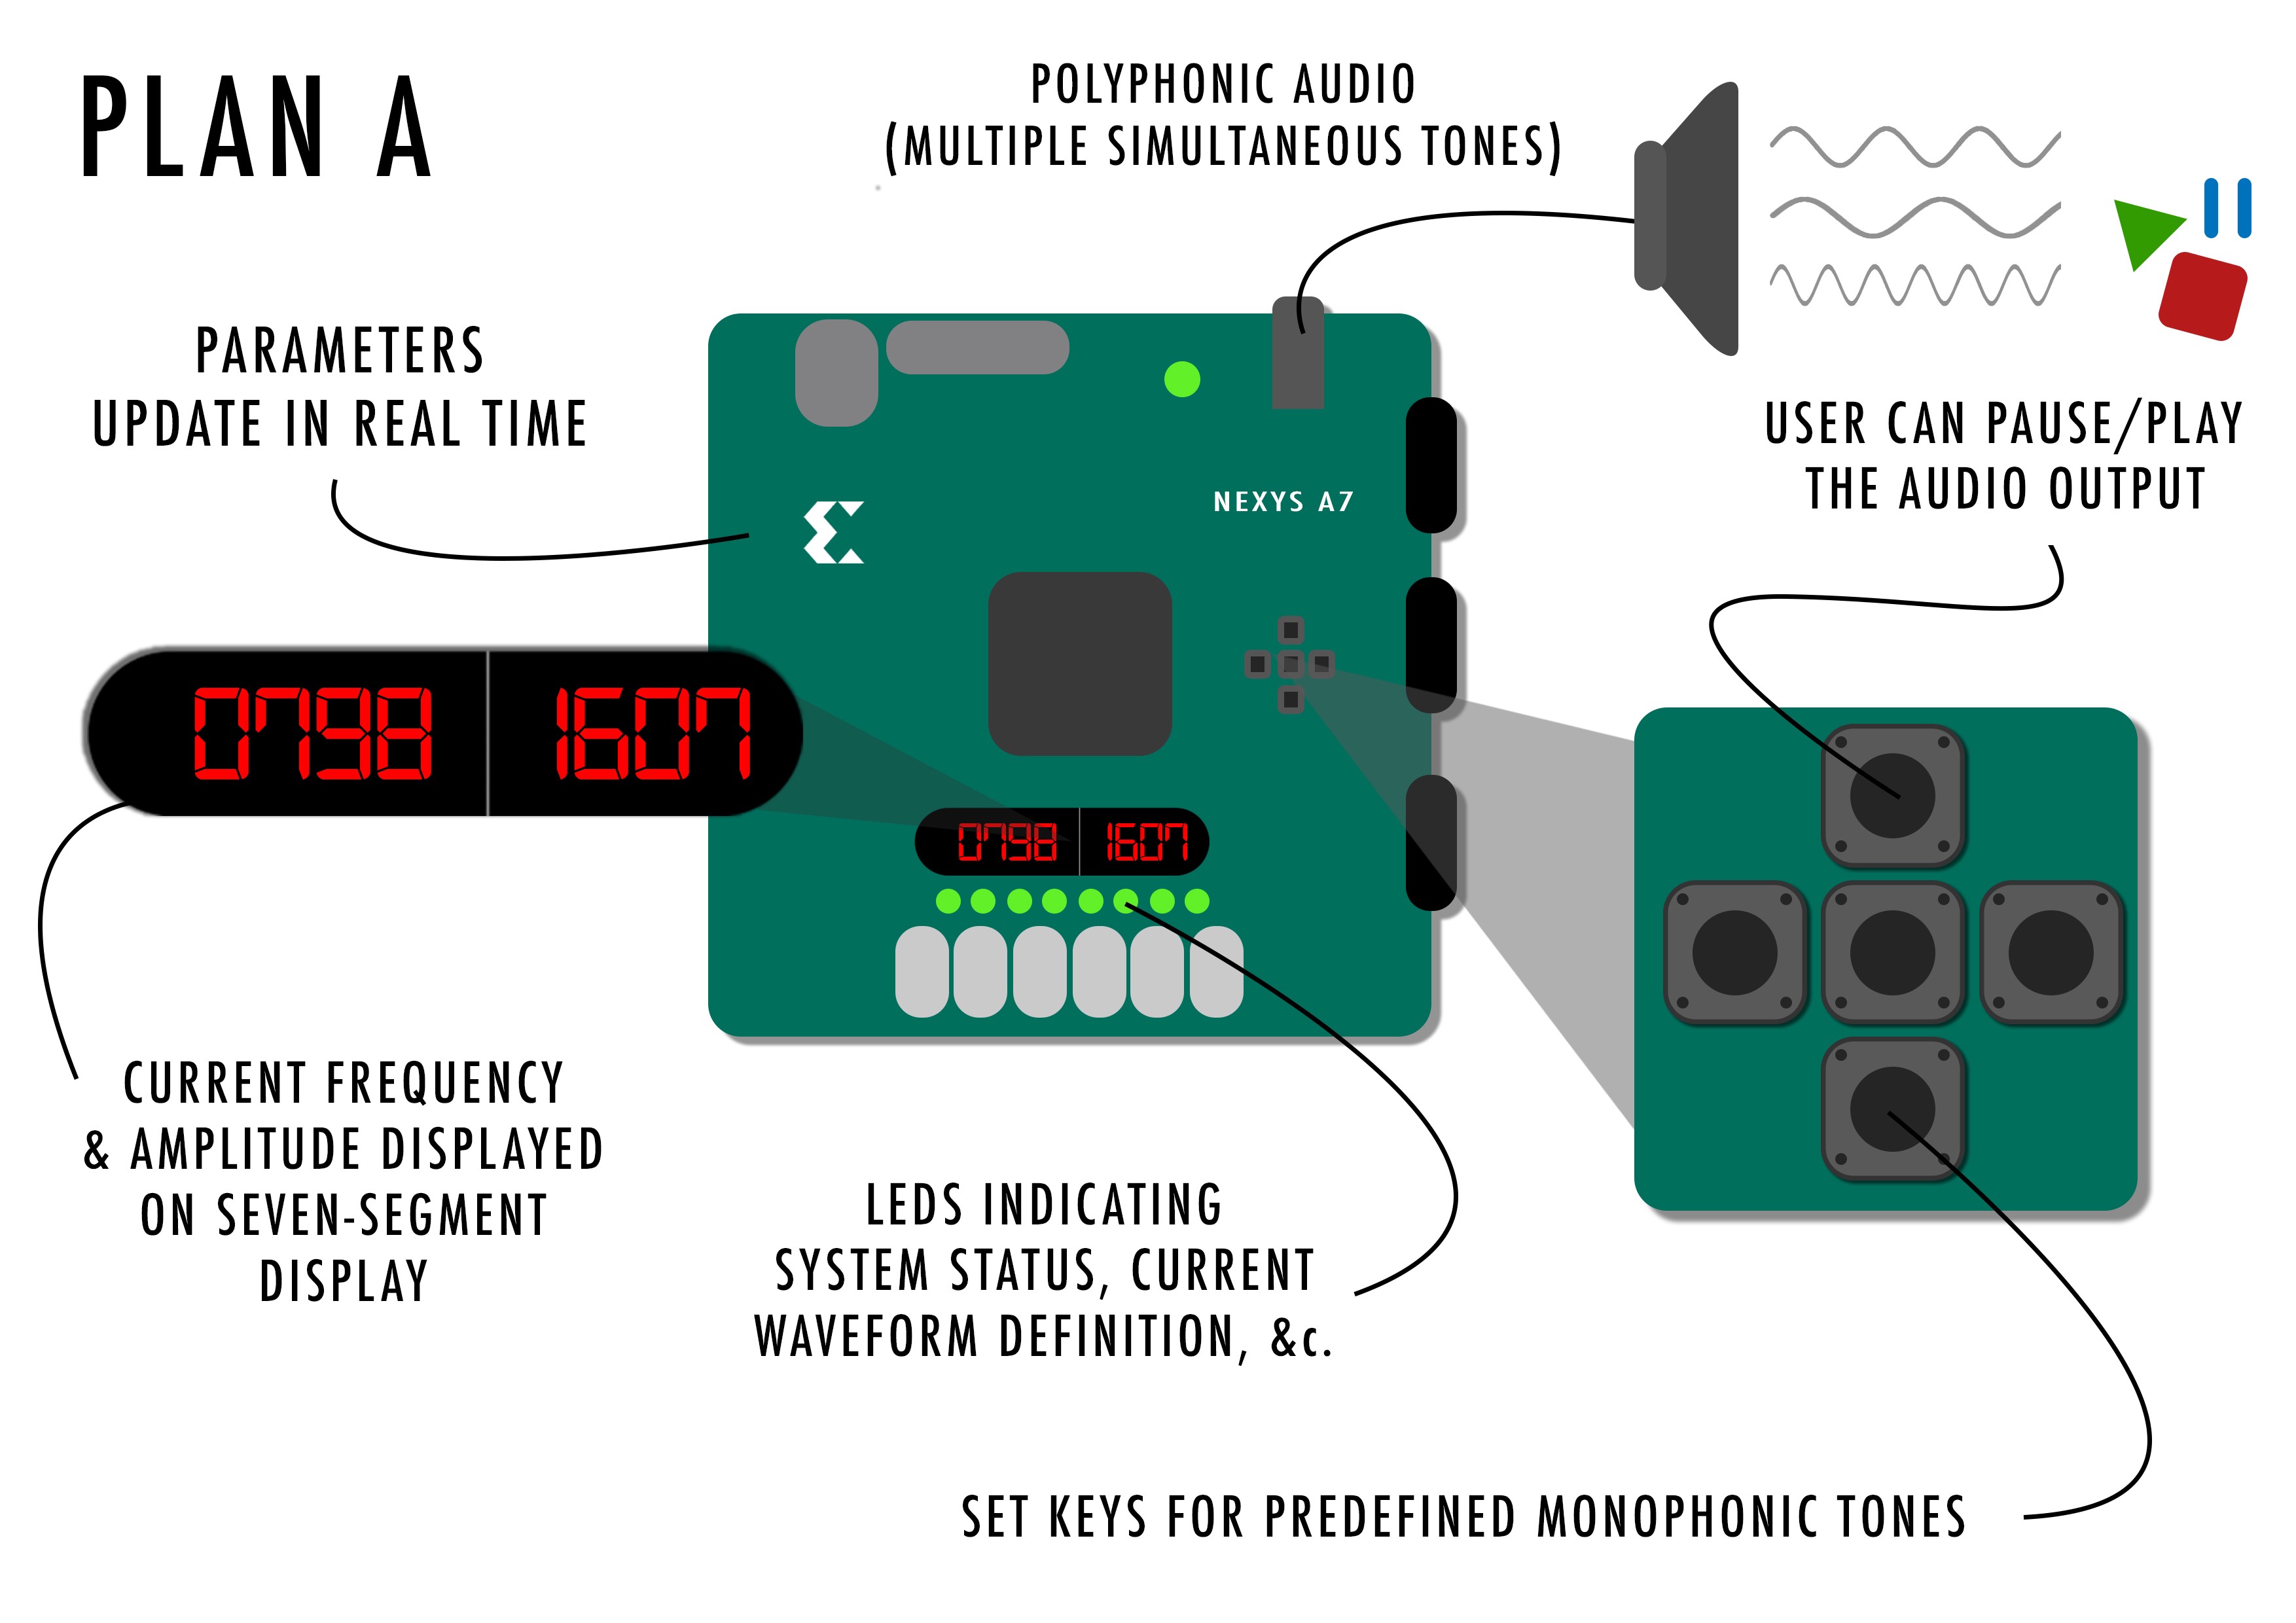 Polyphonic Synthesizer using Direct Digital Synthesis on an FPGA